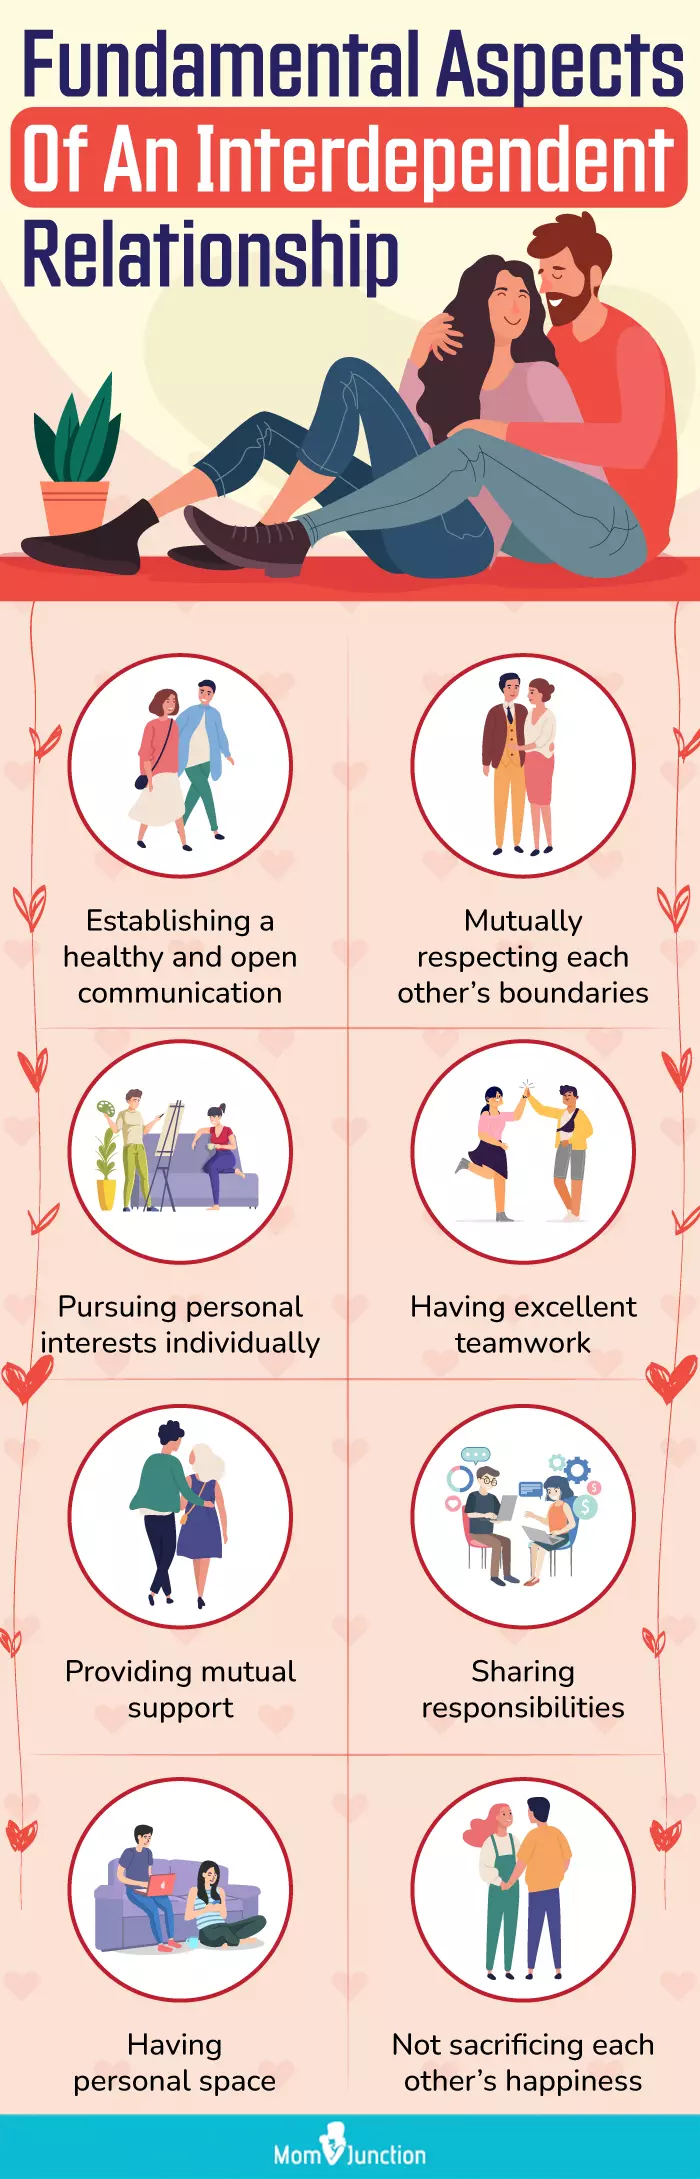 fundamental aspects of an interdependent relationship (infographic)